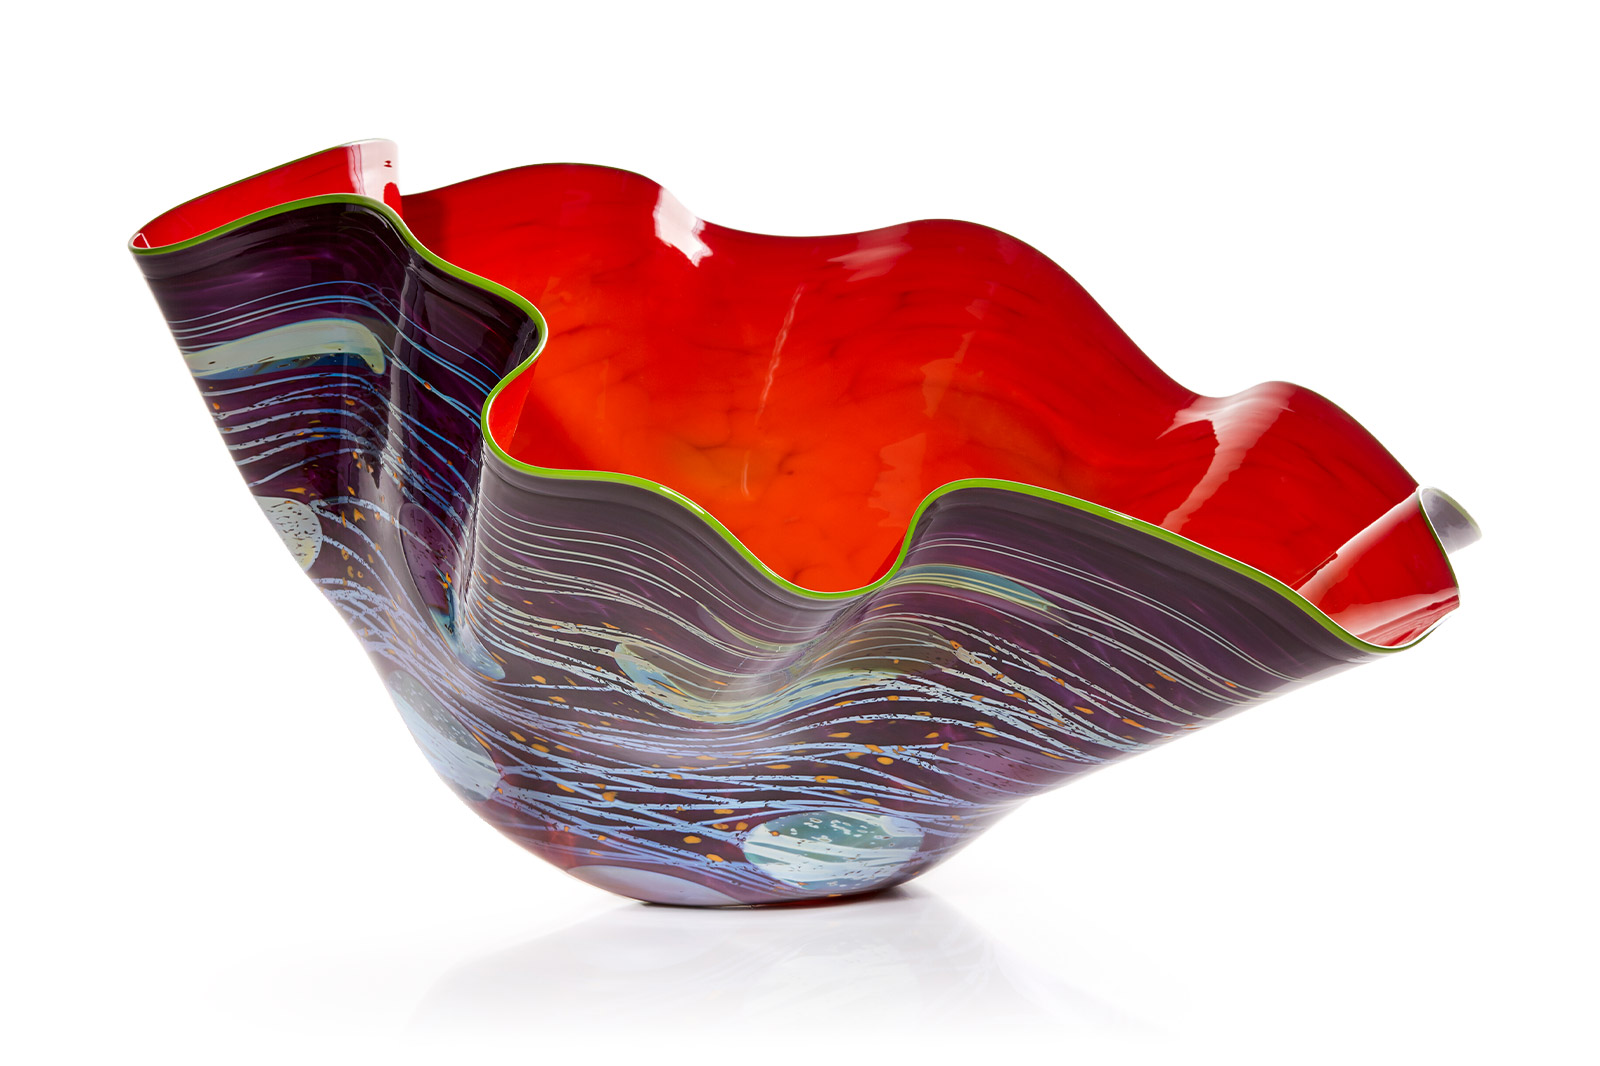 Scarlet Macchia with Evergreen Lip Wrap, 2019, Dale Chihuly